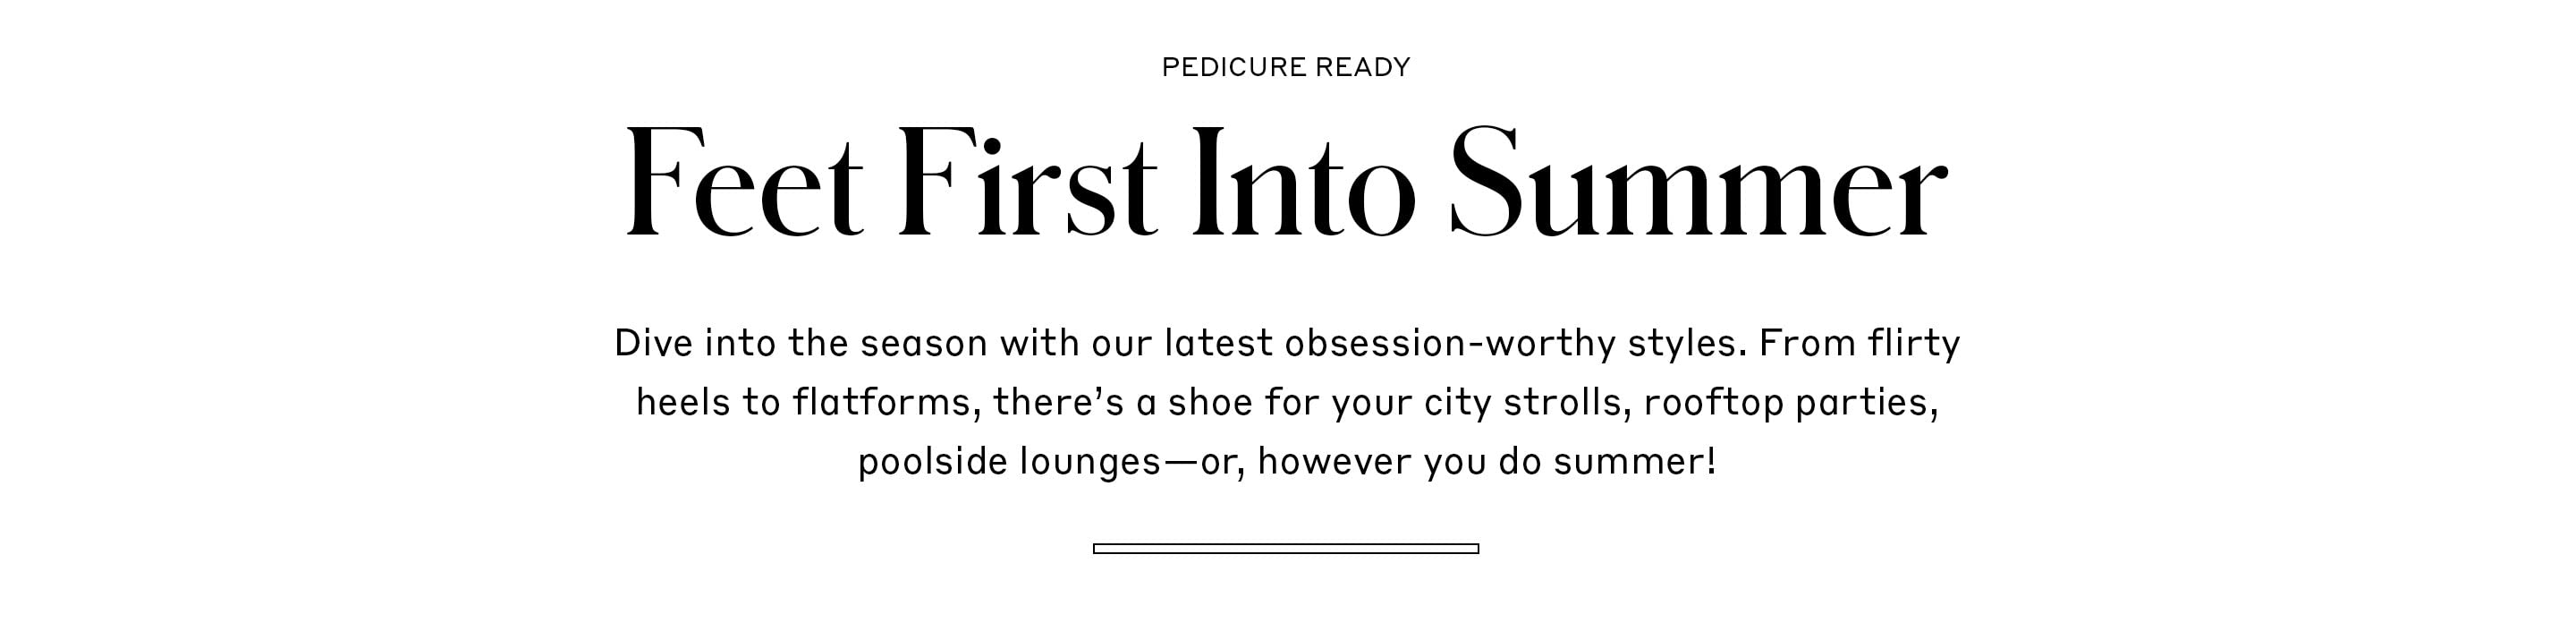 Feet First Into Summer - Dive into the season with our latest obsession-worthy styles. From flirty heels to flatforms, there’s a shoe for your city strolls, rooftop parties, poolside lounges—or, however you do summer!